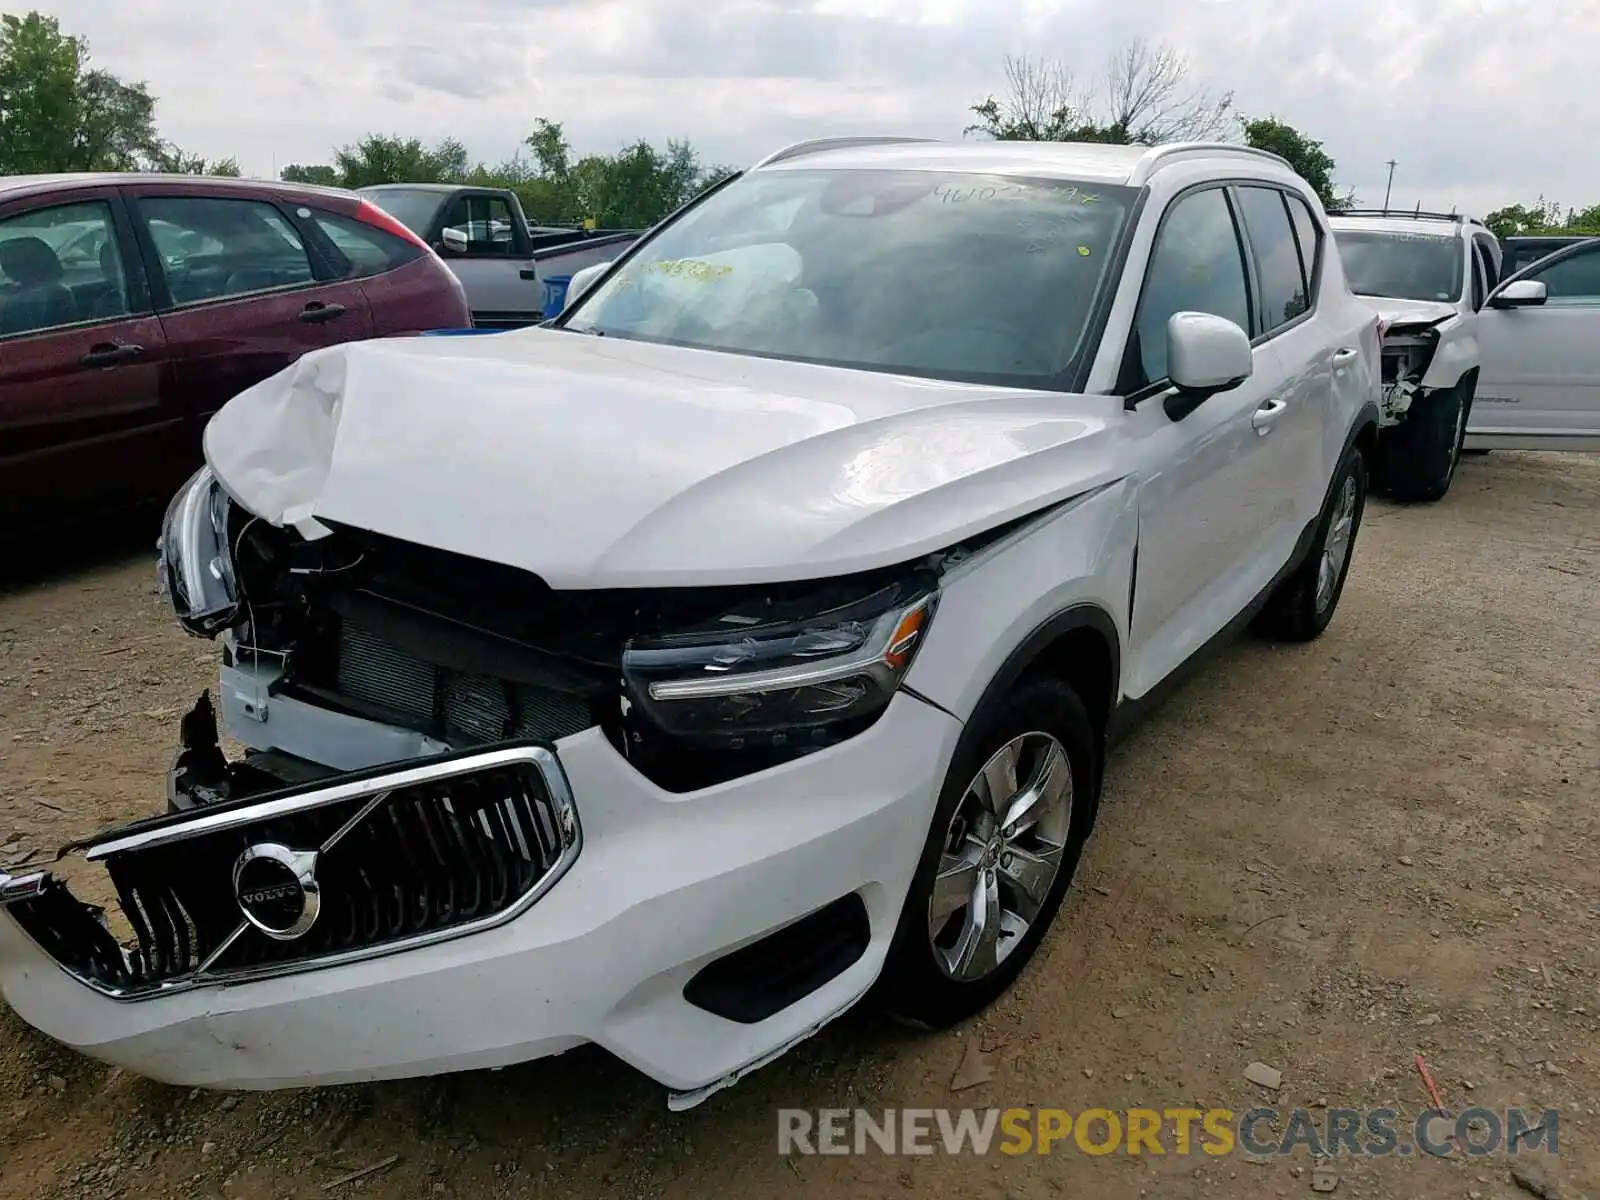 2 Photograph of a damaged car YV4162UK1K2045527 VOLVO XC40 T5 2019